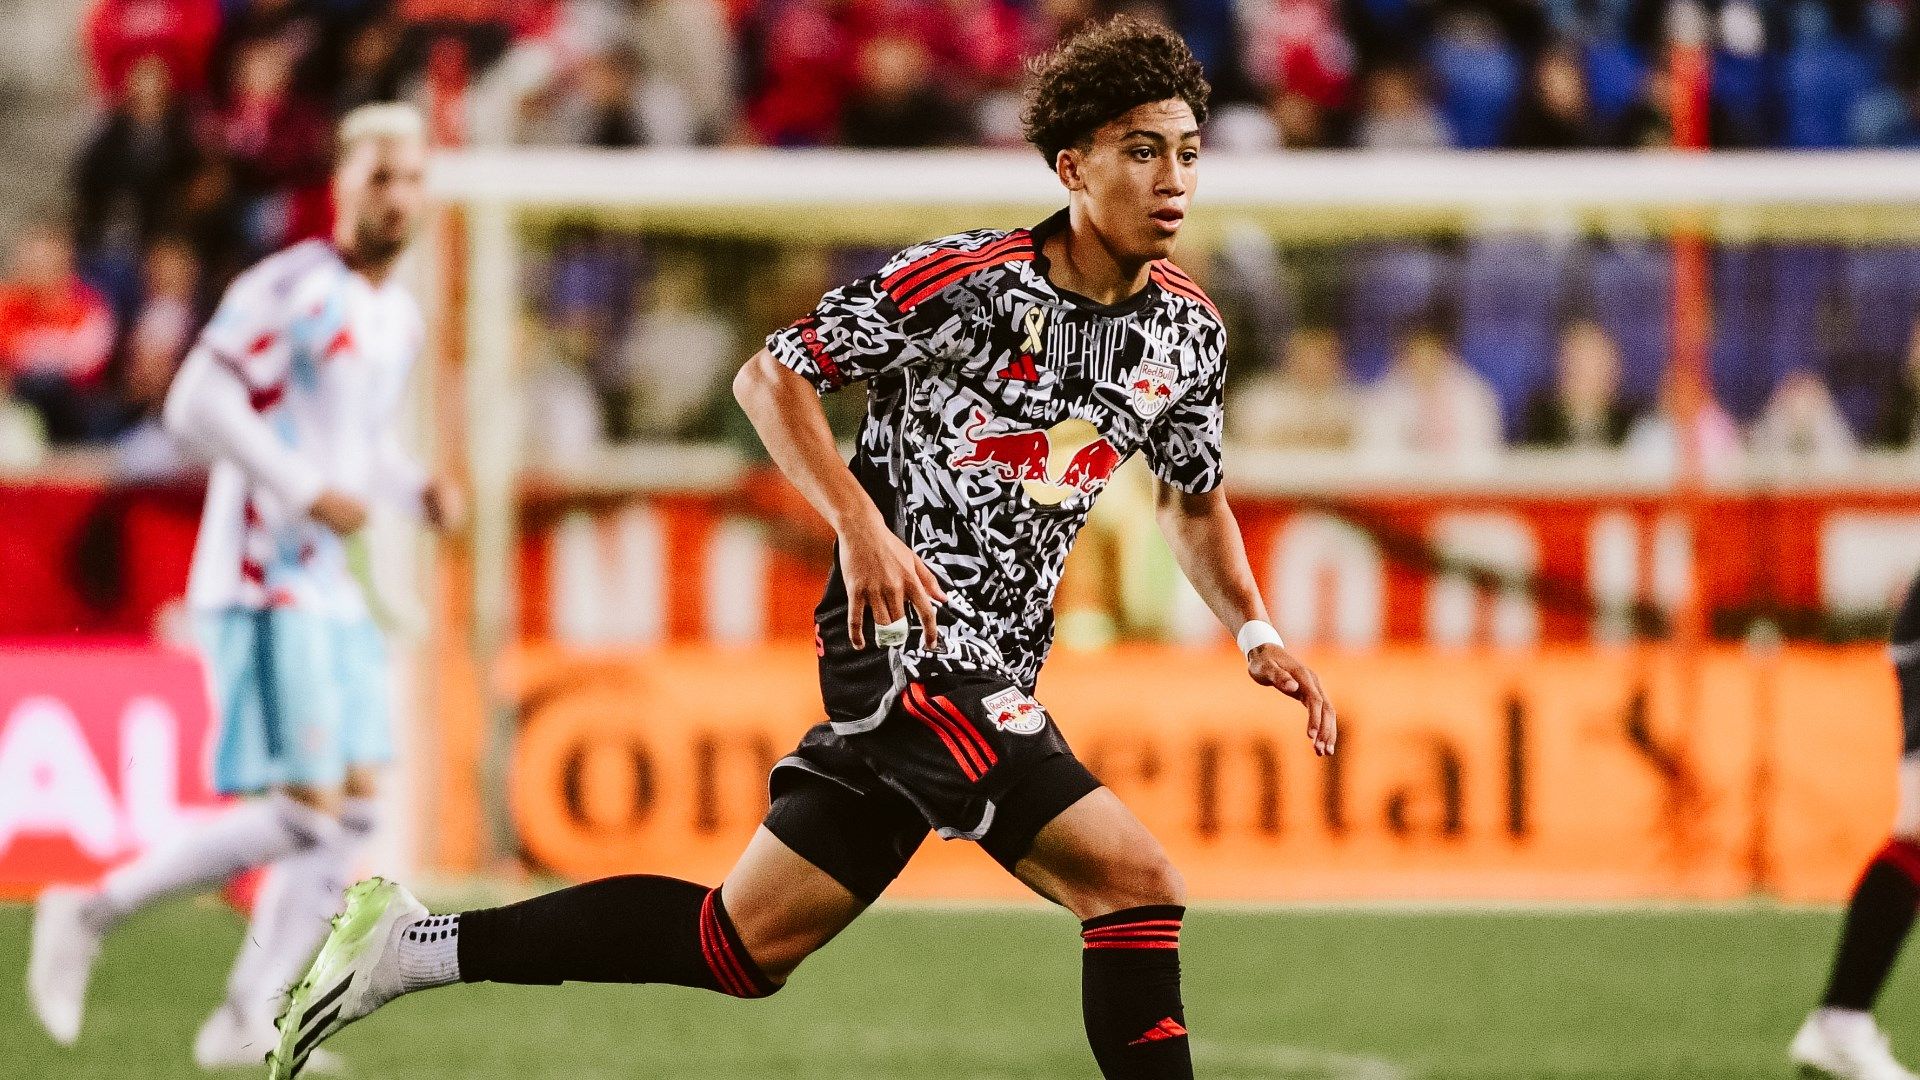 Weekly Wonderkid: New York Red Bulls starlet Julian Hall already on the radar of Chelsea, Man City and Real Madrid